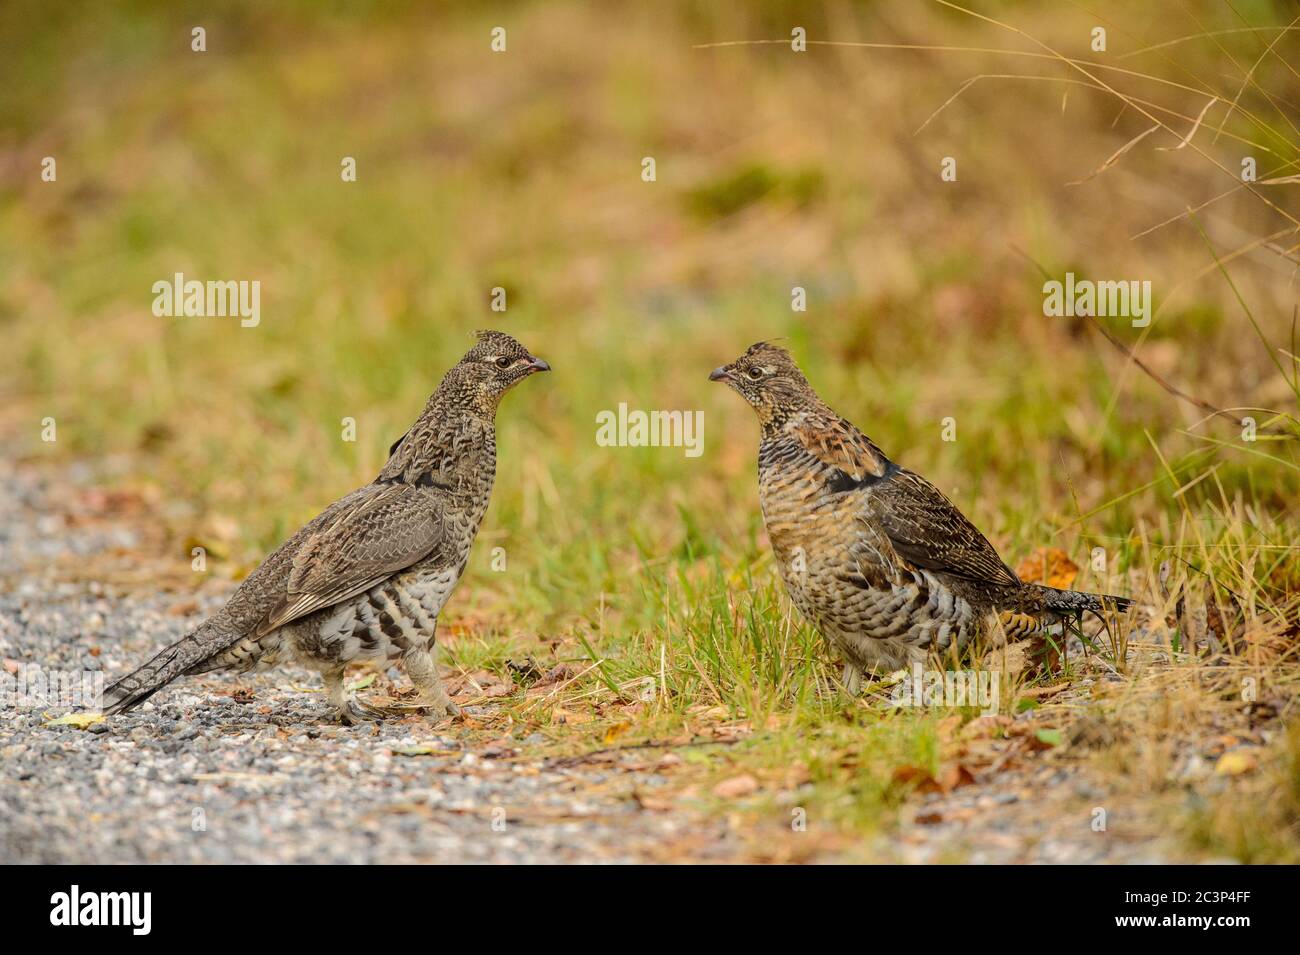 Ruffed grouse (Bonasa umbellus) Two individuals confronting one another in early autumn, Greater Sudbury, Ontario, Canada Stock Photo